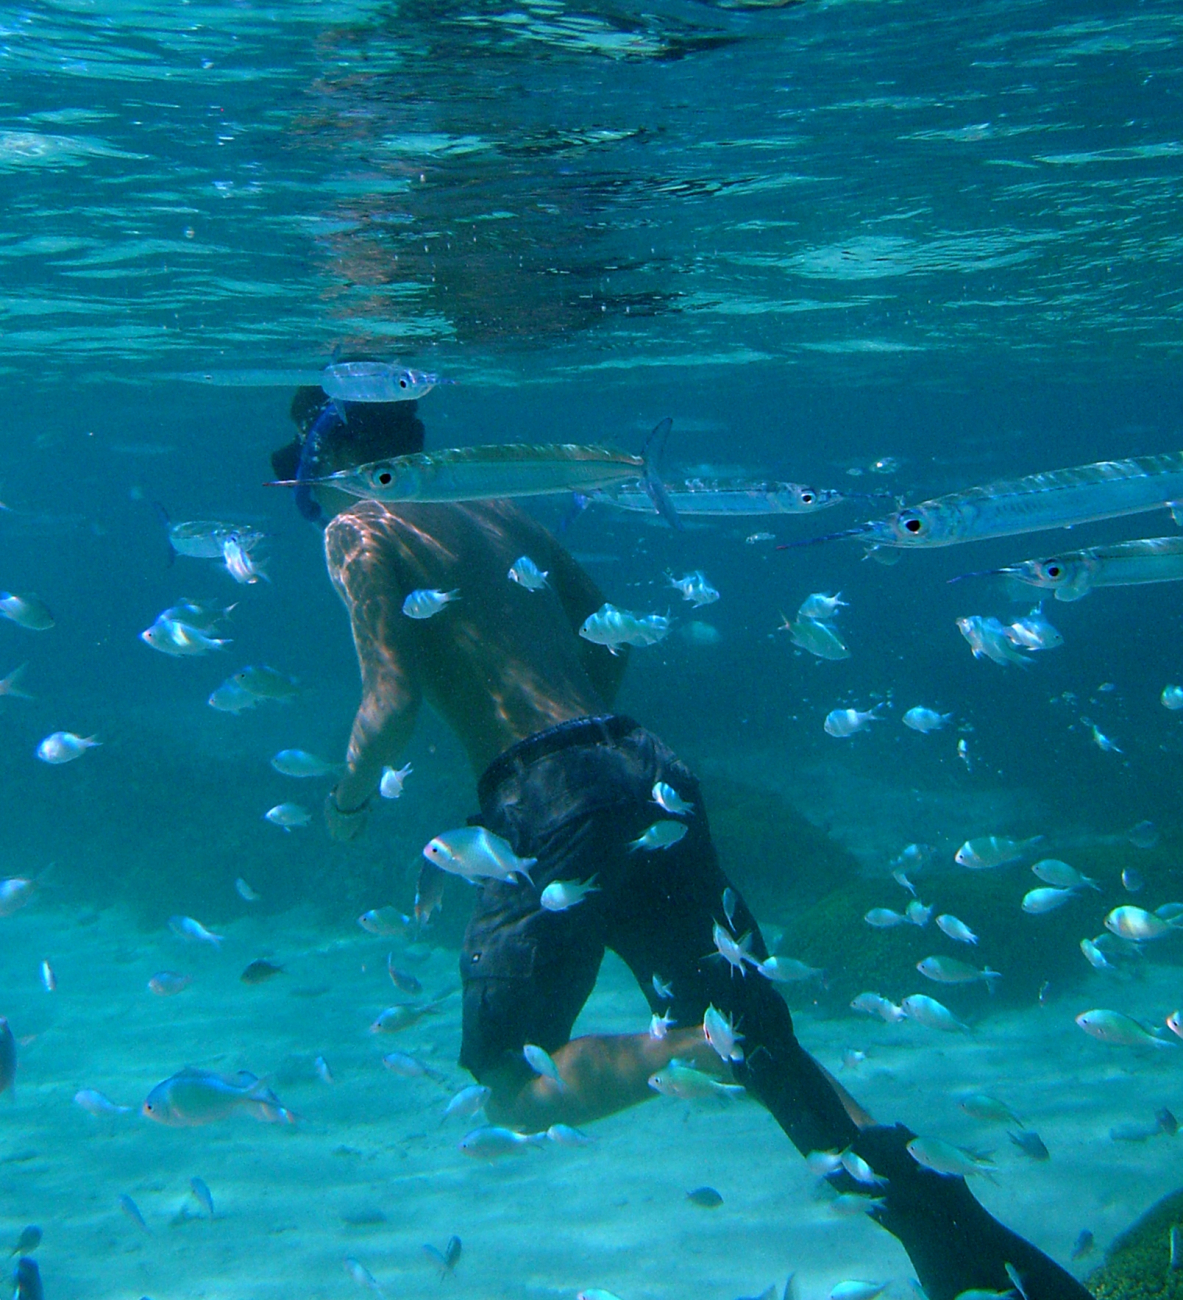 Make sure not to touch the bottom when snorkeling or scuba diving